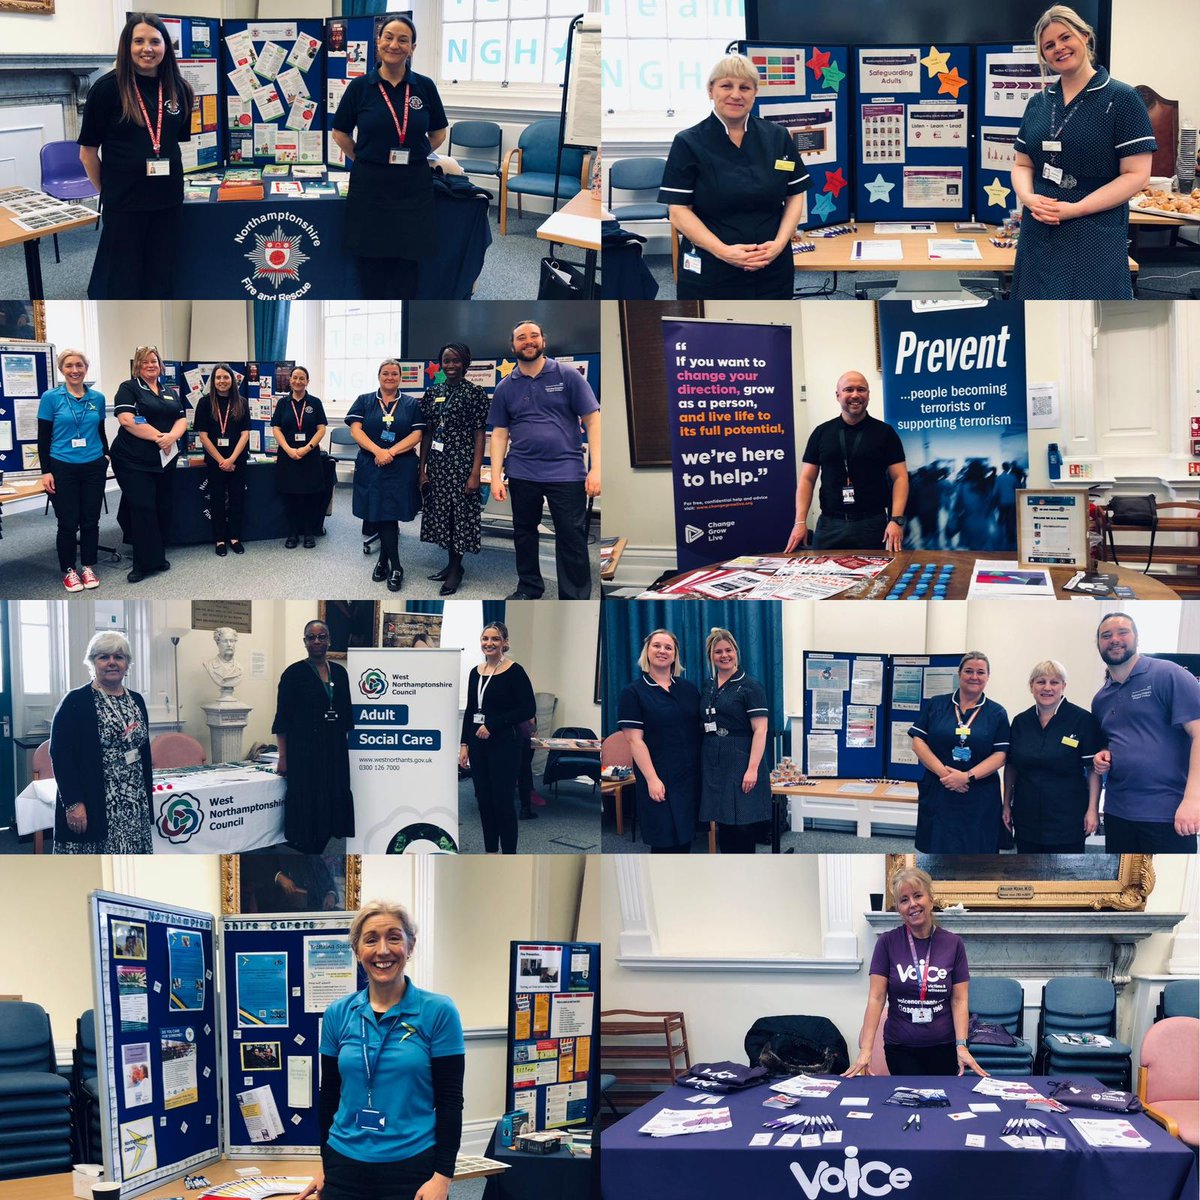 What a superb day for our Safeguarding Day event @NGHnhstrust It’s crucial we continue to raise awareness and educate ourselves on how we can do better to protect our patients and staff. Particular thanks to our system partners for joining us 👌🌟